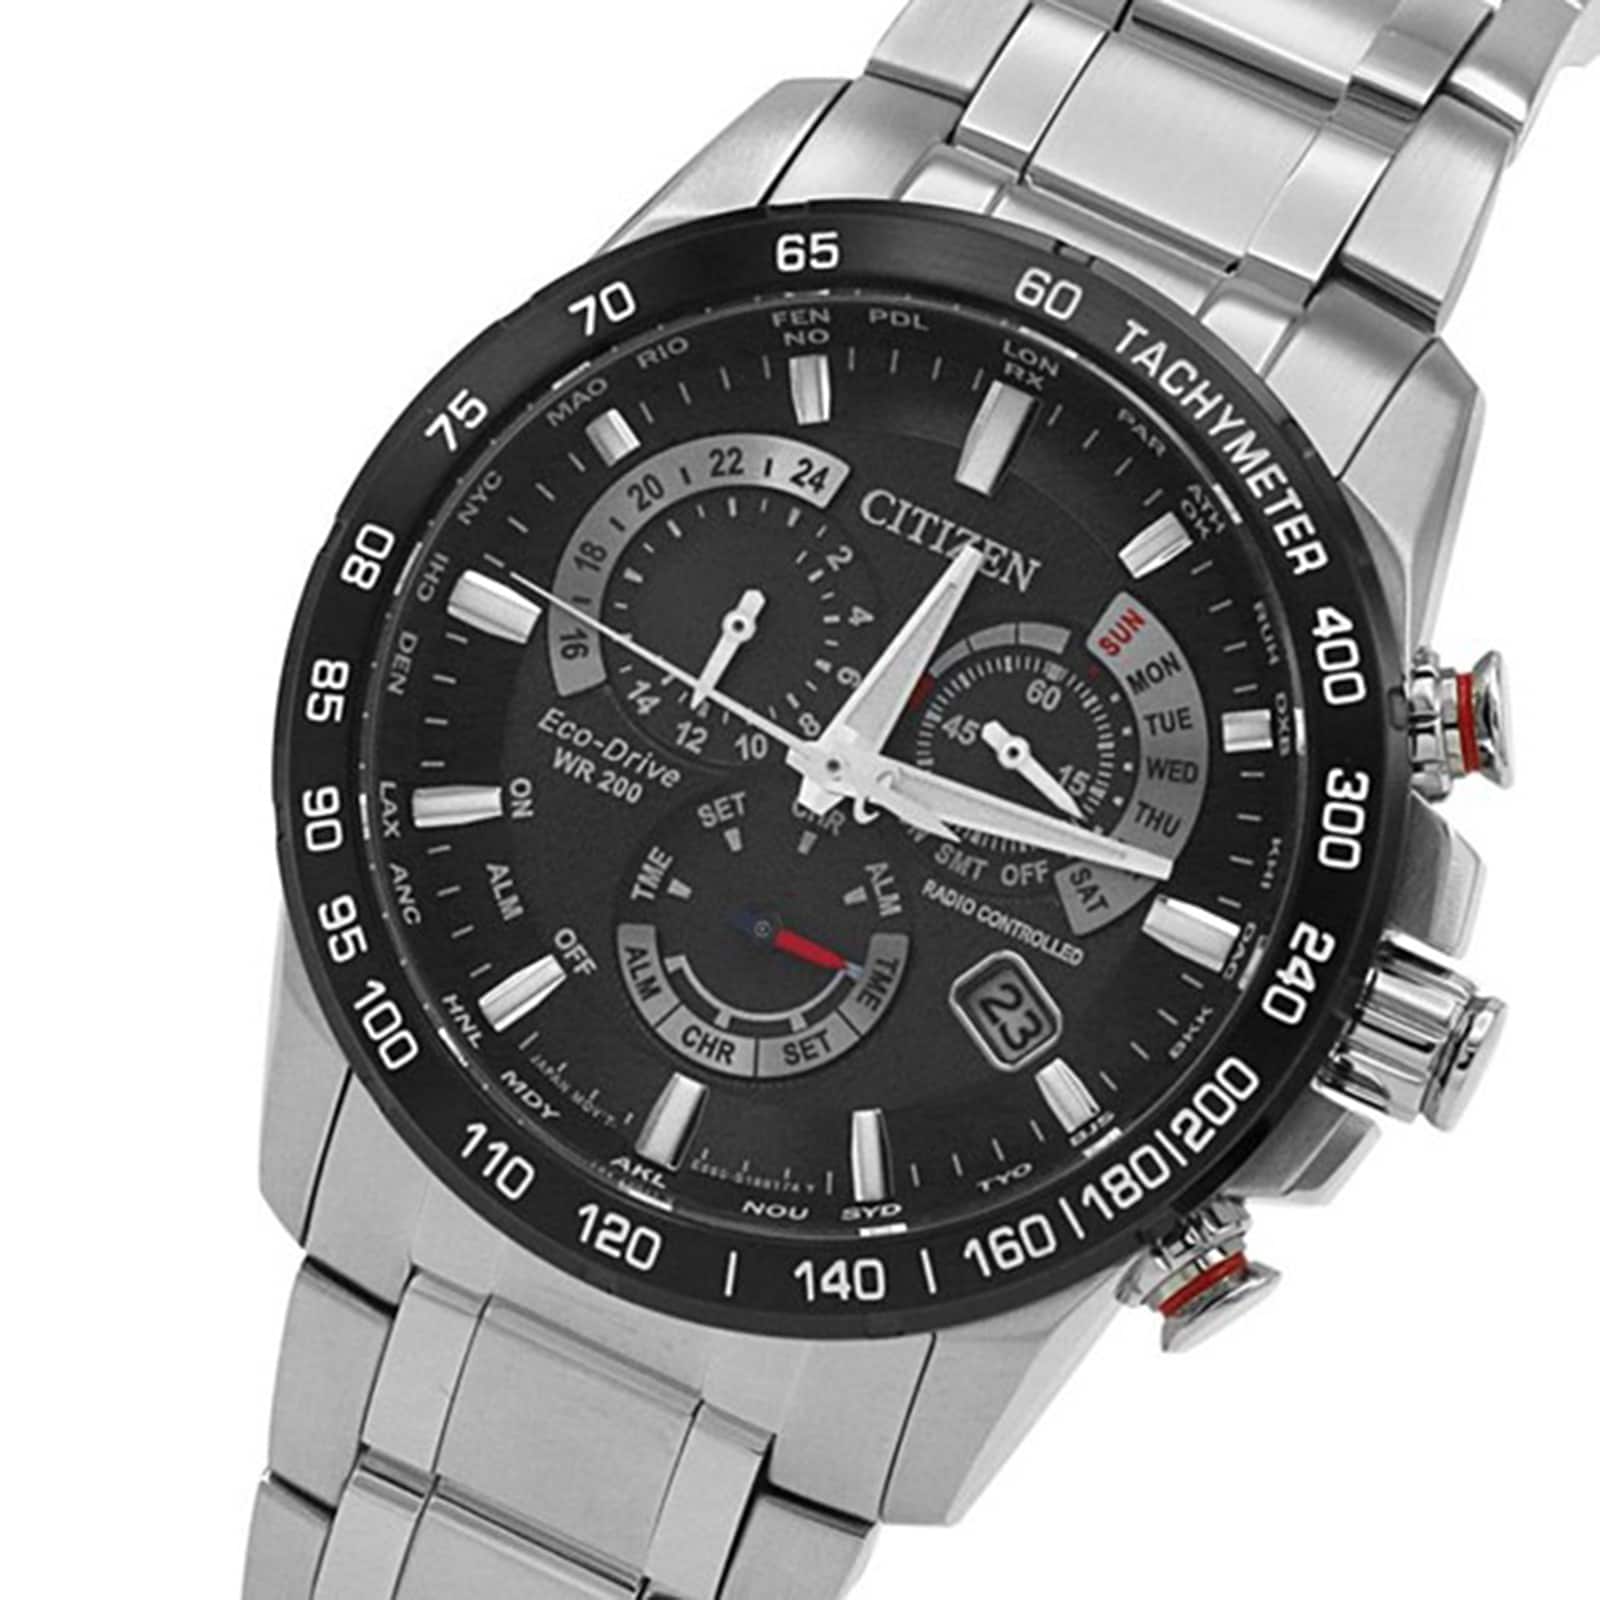 Eco-Drive Gents Perpetual Chrono A.T Watch